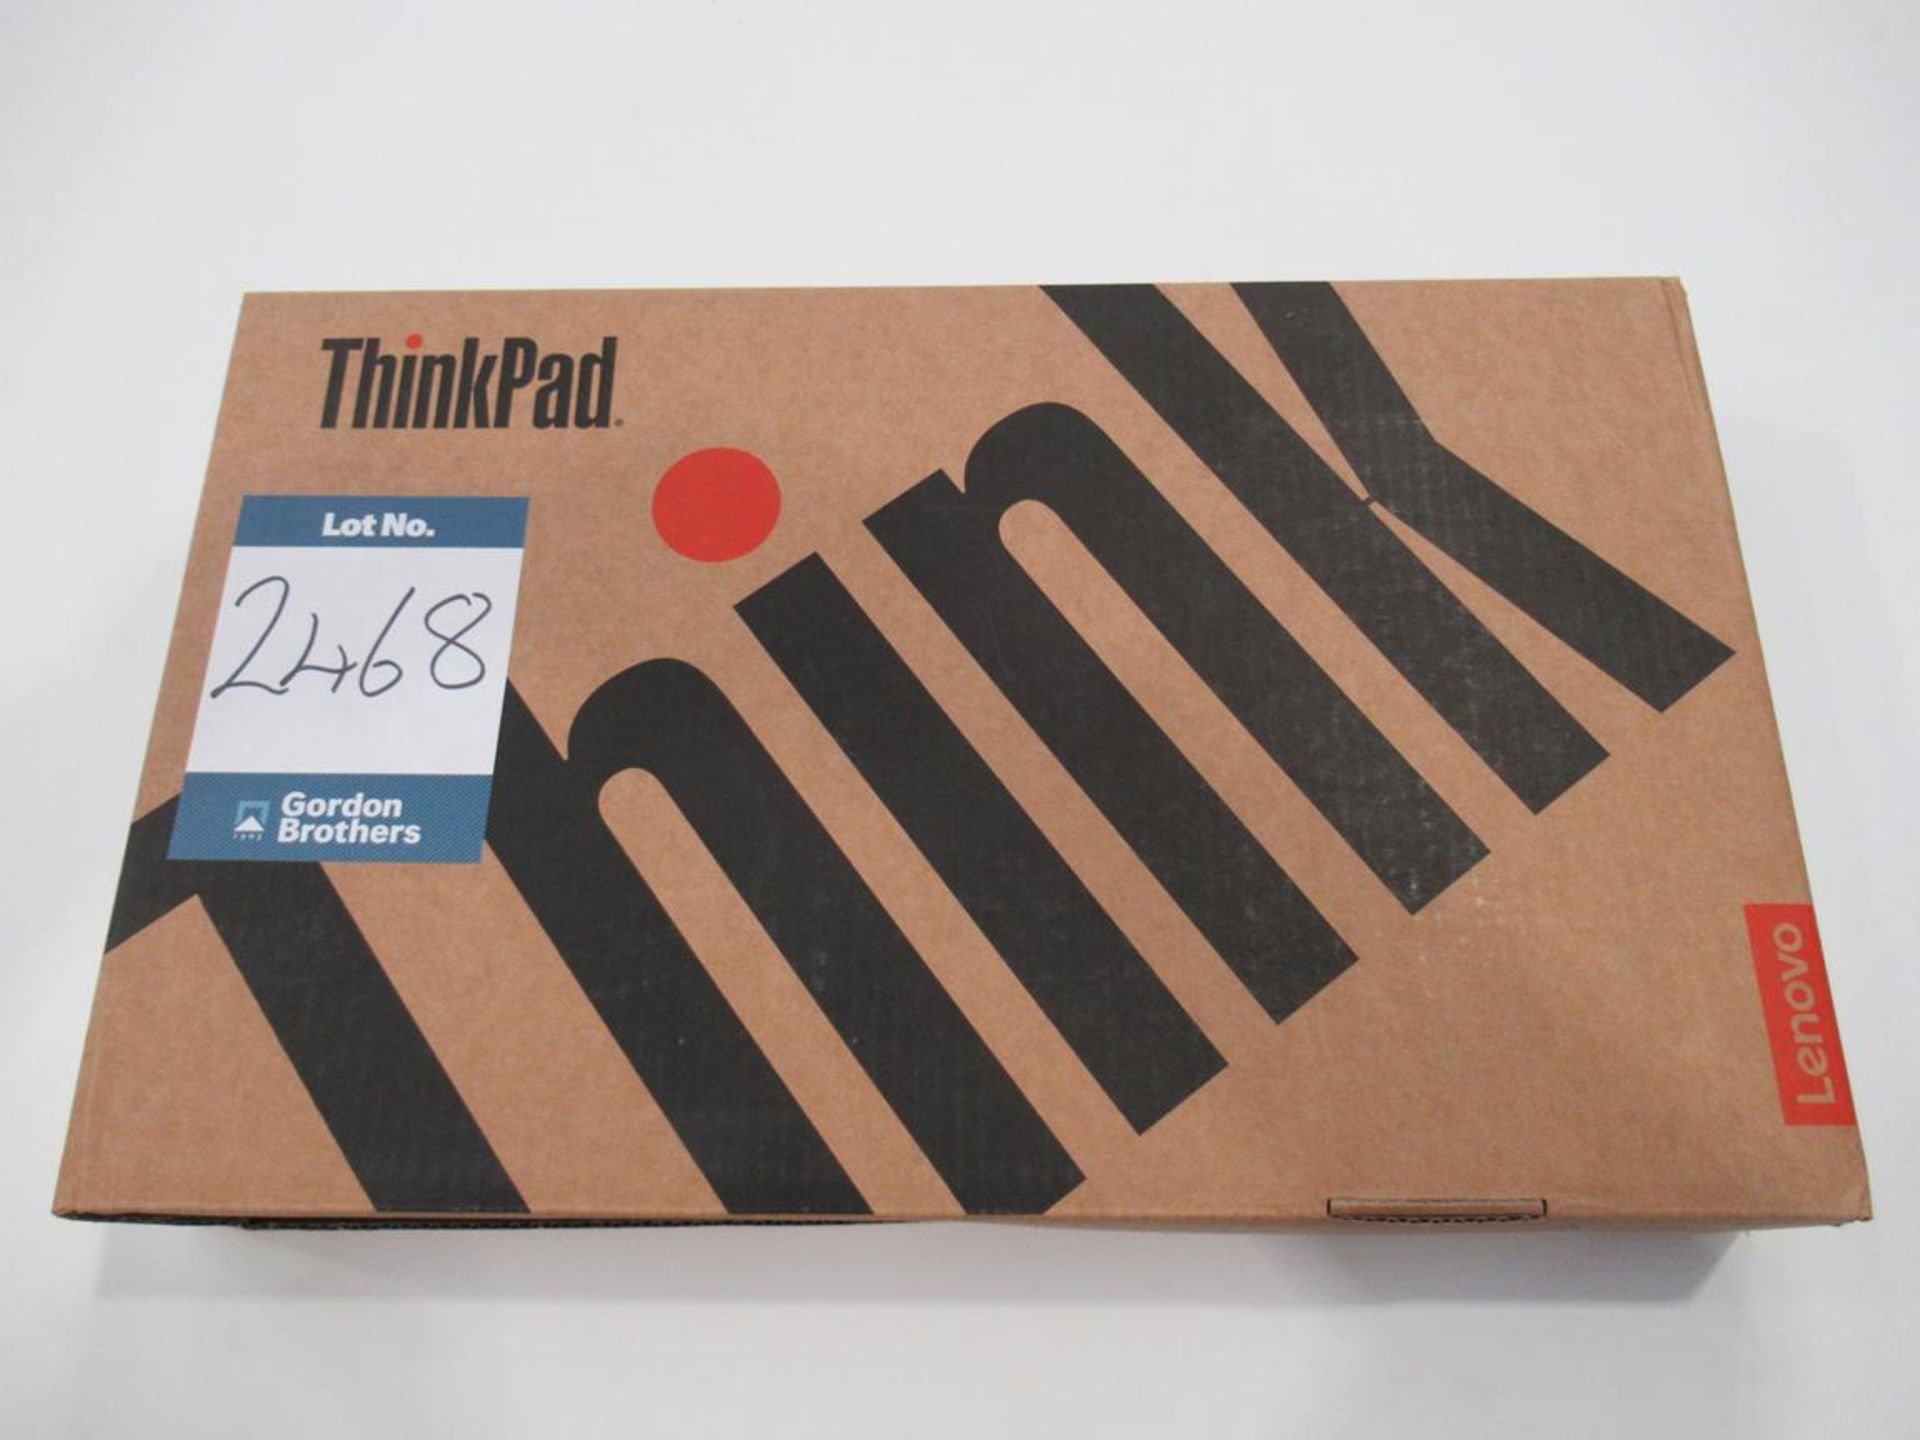 Lenovo, Thinkpad P1 Gen 4 CAD specification (boxed) - Image 3 of 5